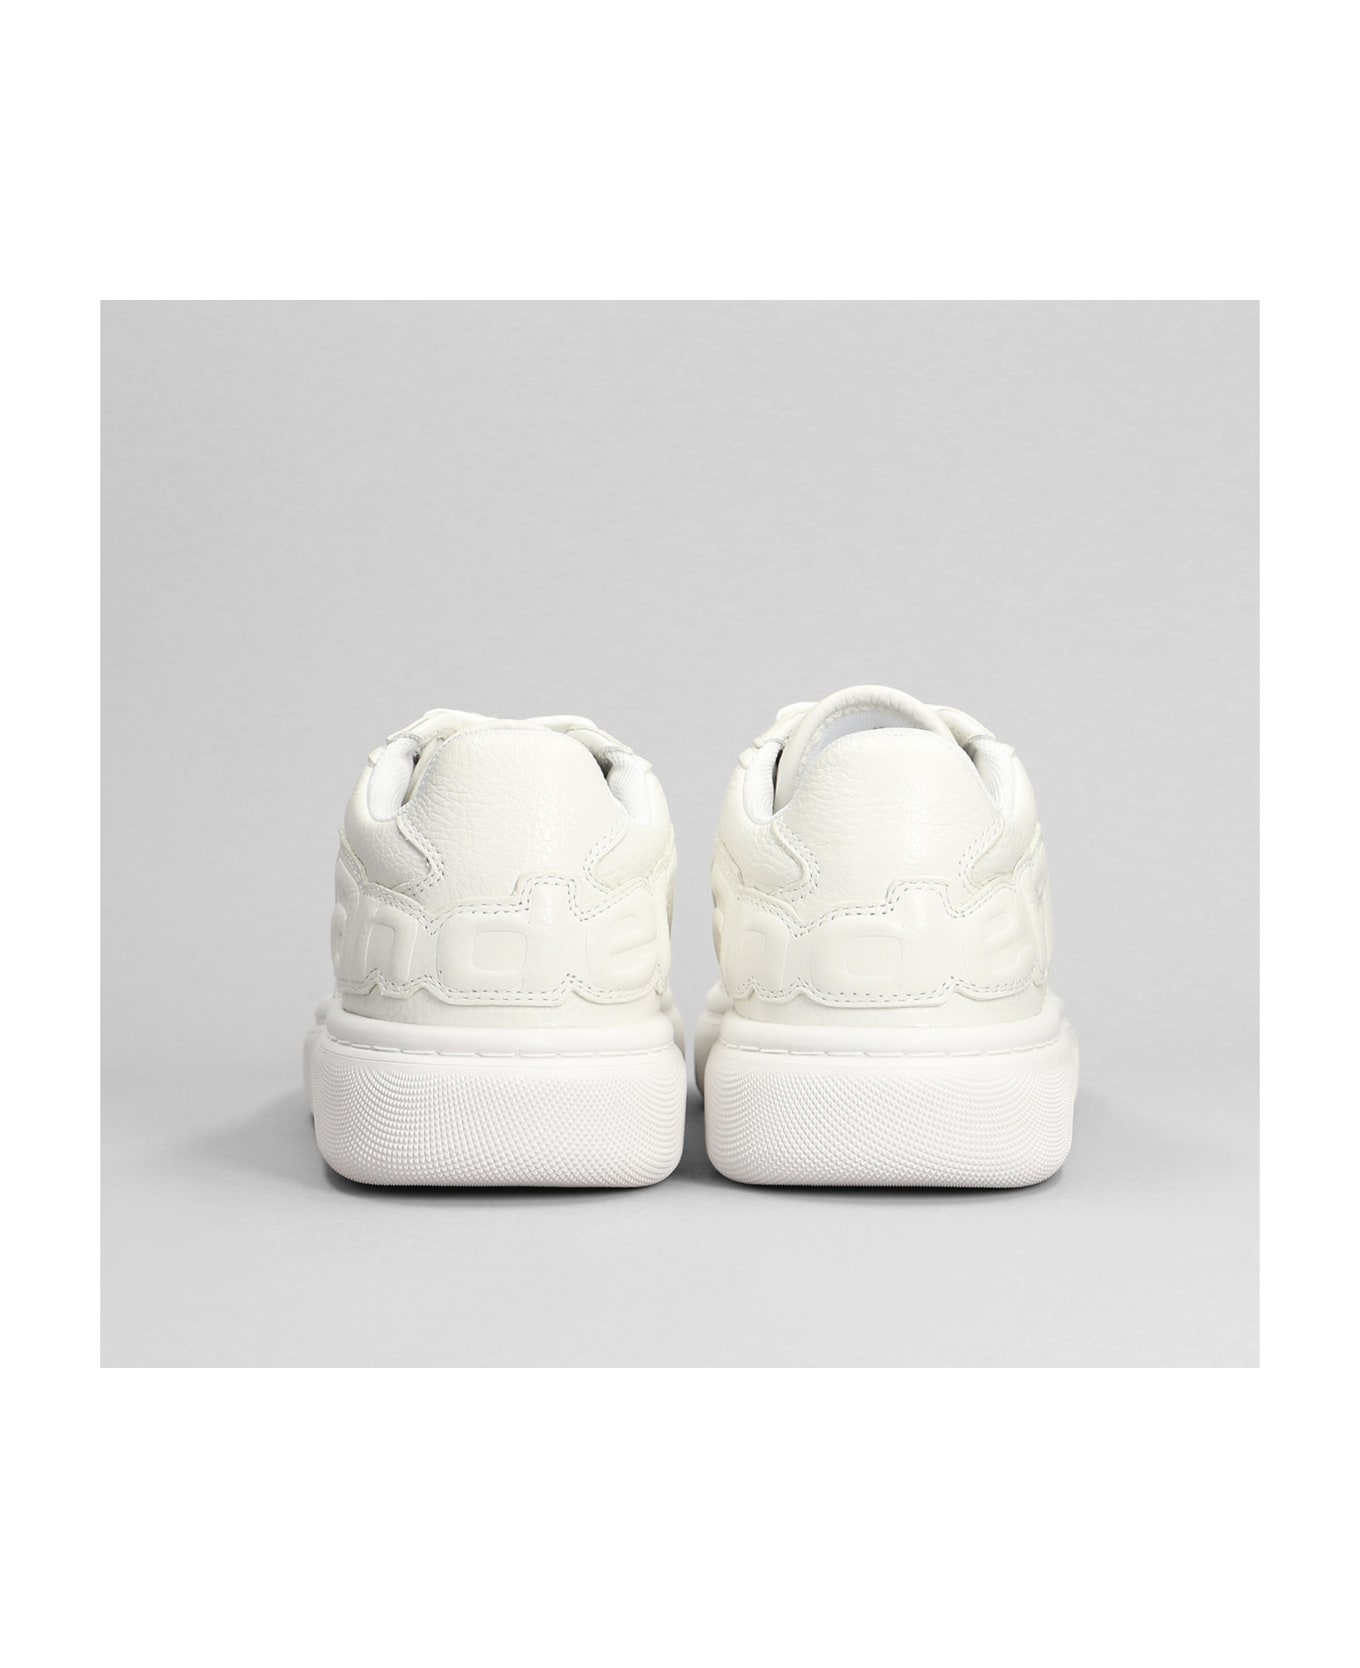 Alexander Wang Sneakers In White Leather - white スニーカー